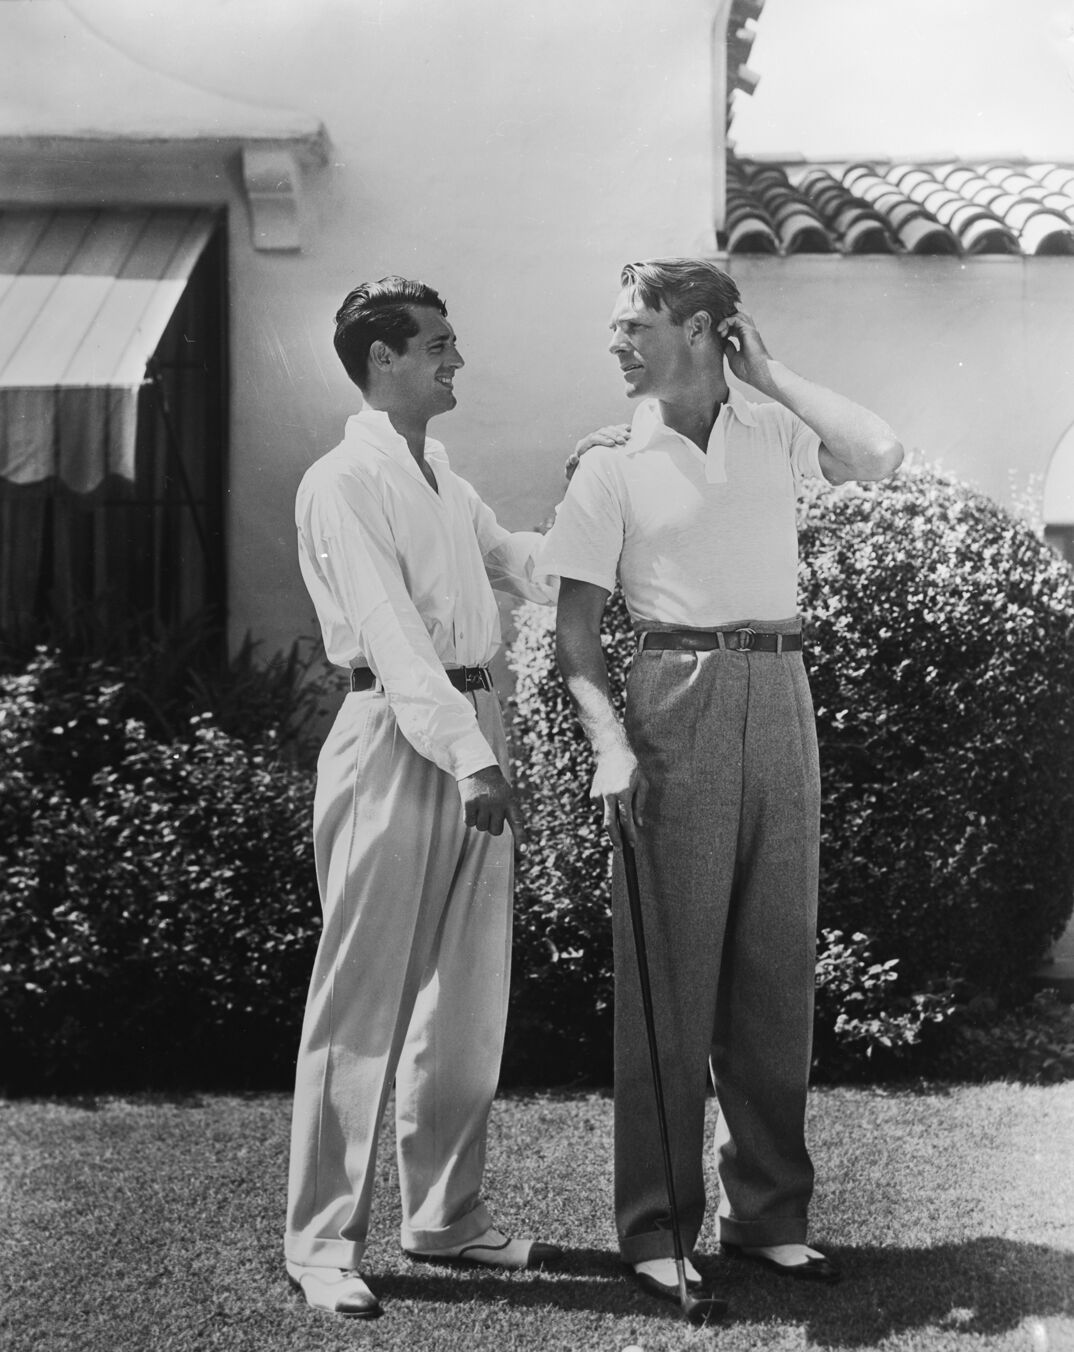 circa 1935:  British born actor Cary Grant (1904 - 1986), born Archibald Leach, with the American actor, Randolph Scott (1898 - 1987). The two stars shared a beach house during the 1930's, which was jokingly known as Bachelor Hall.  (Photo via John Kobal Foundation/Getty Images)